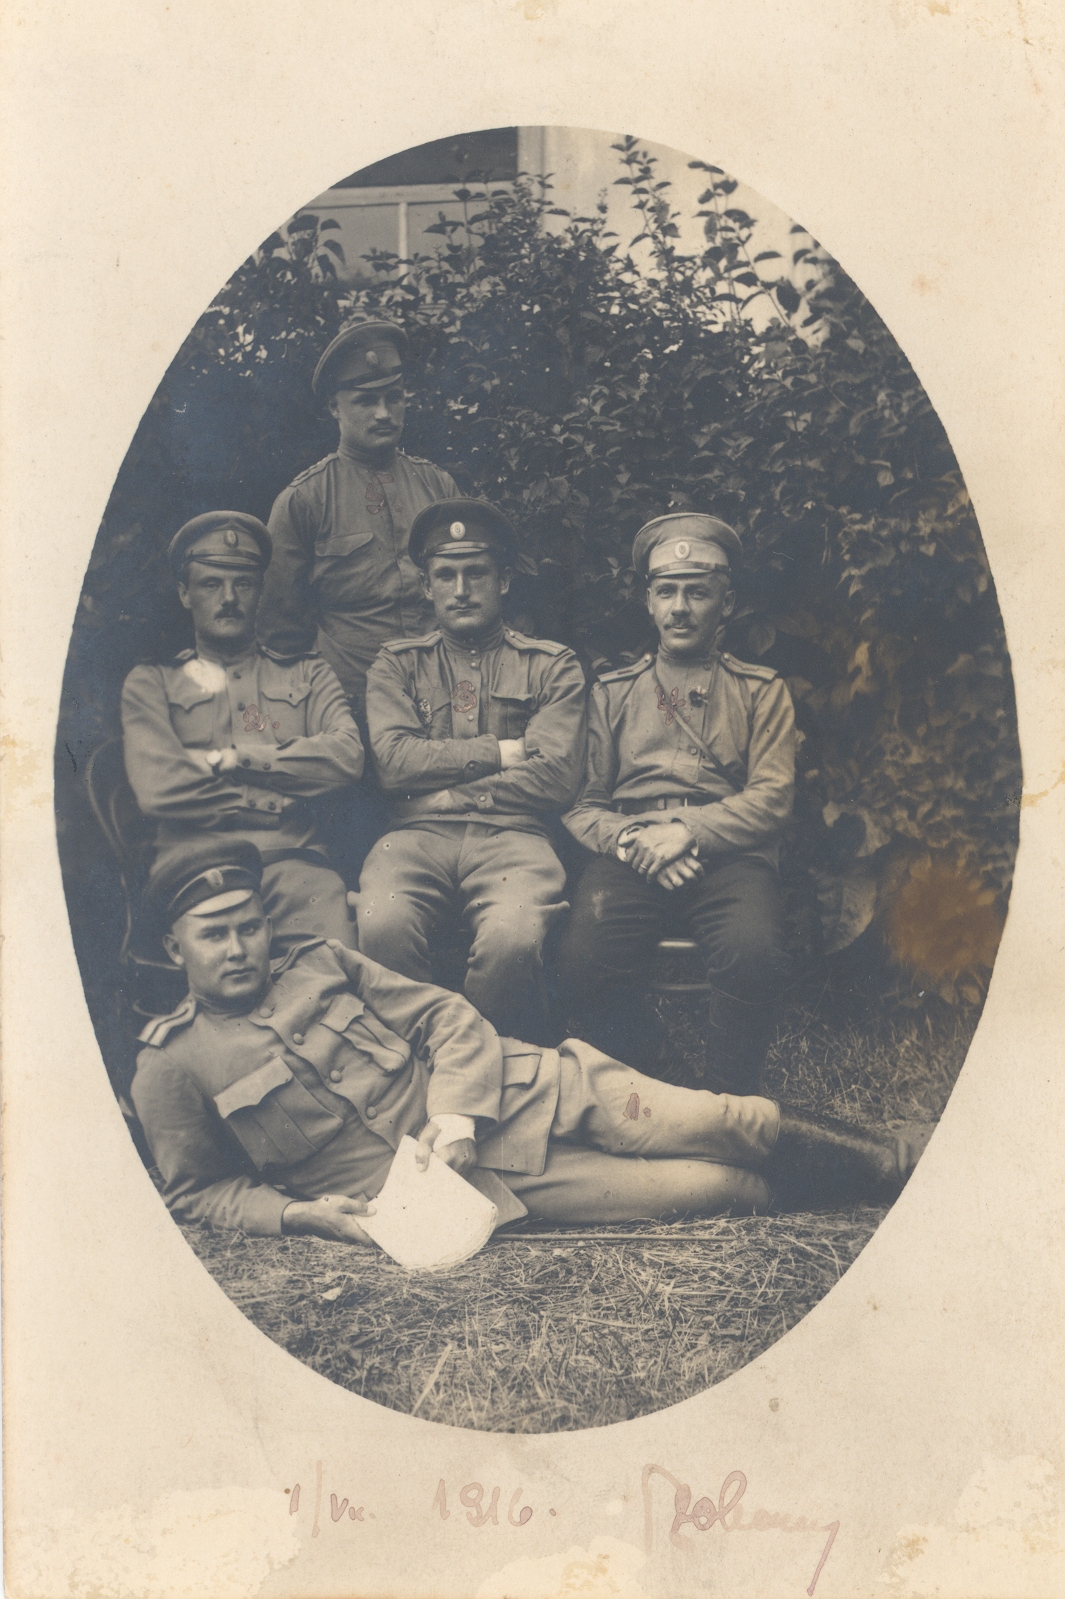 J. Vares-Barbarus with war partners in World War I in 1916